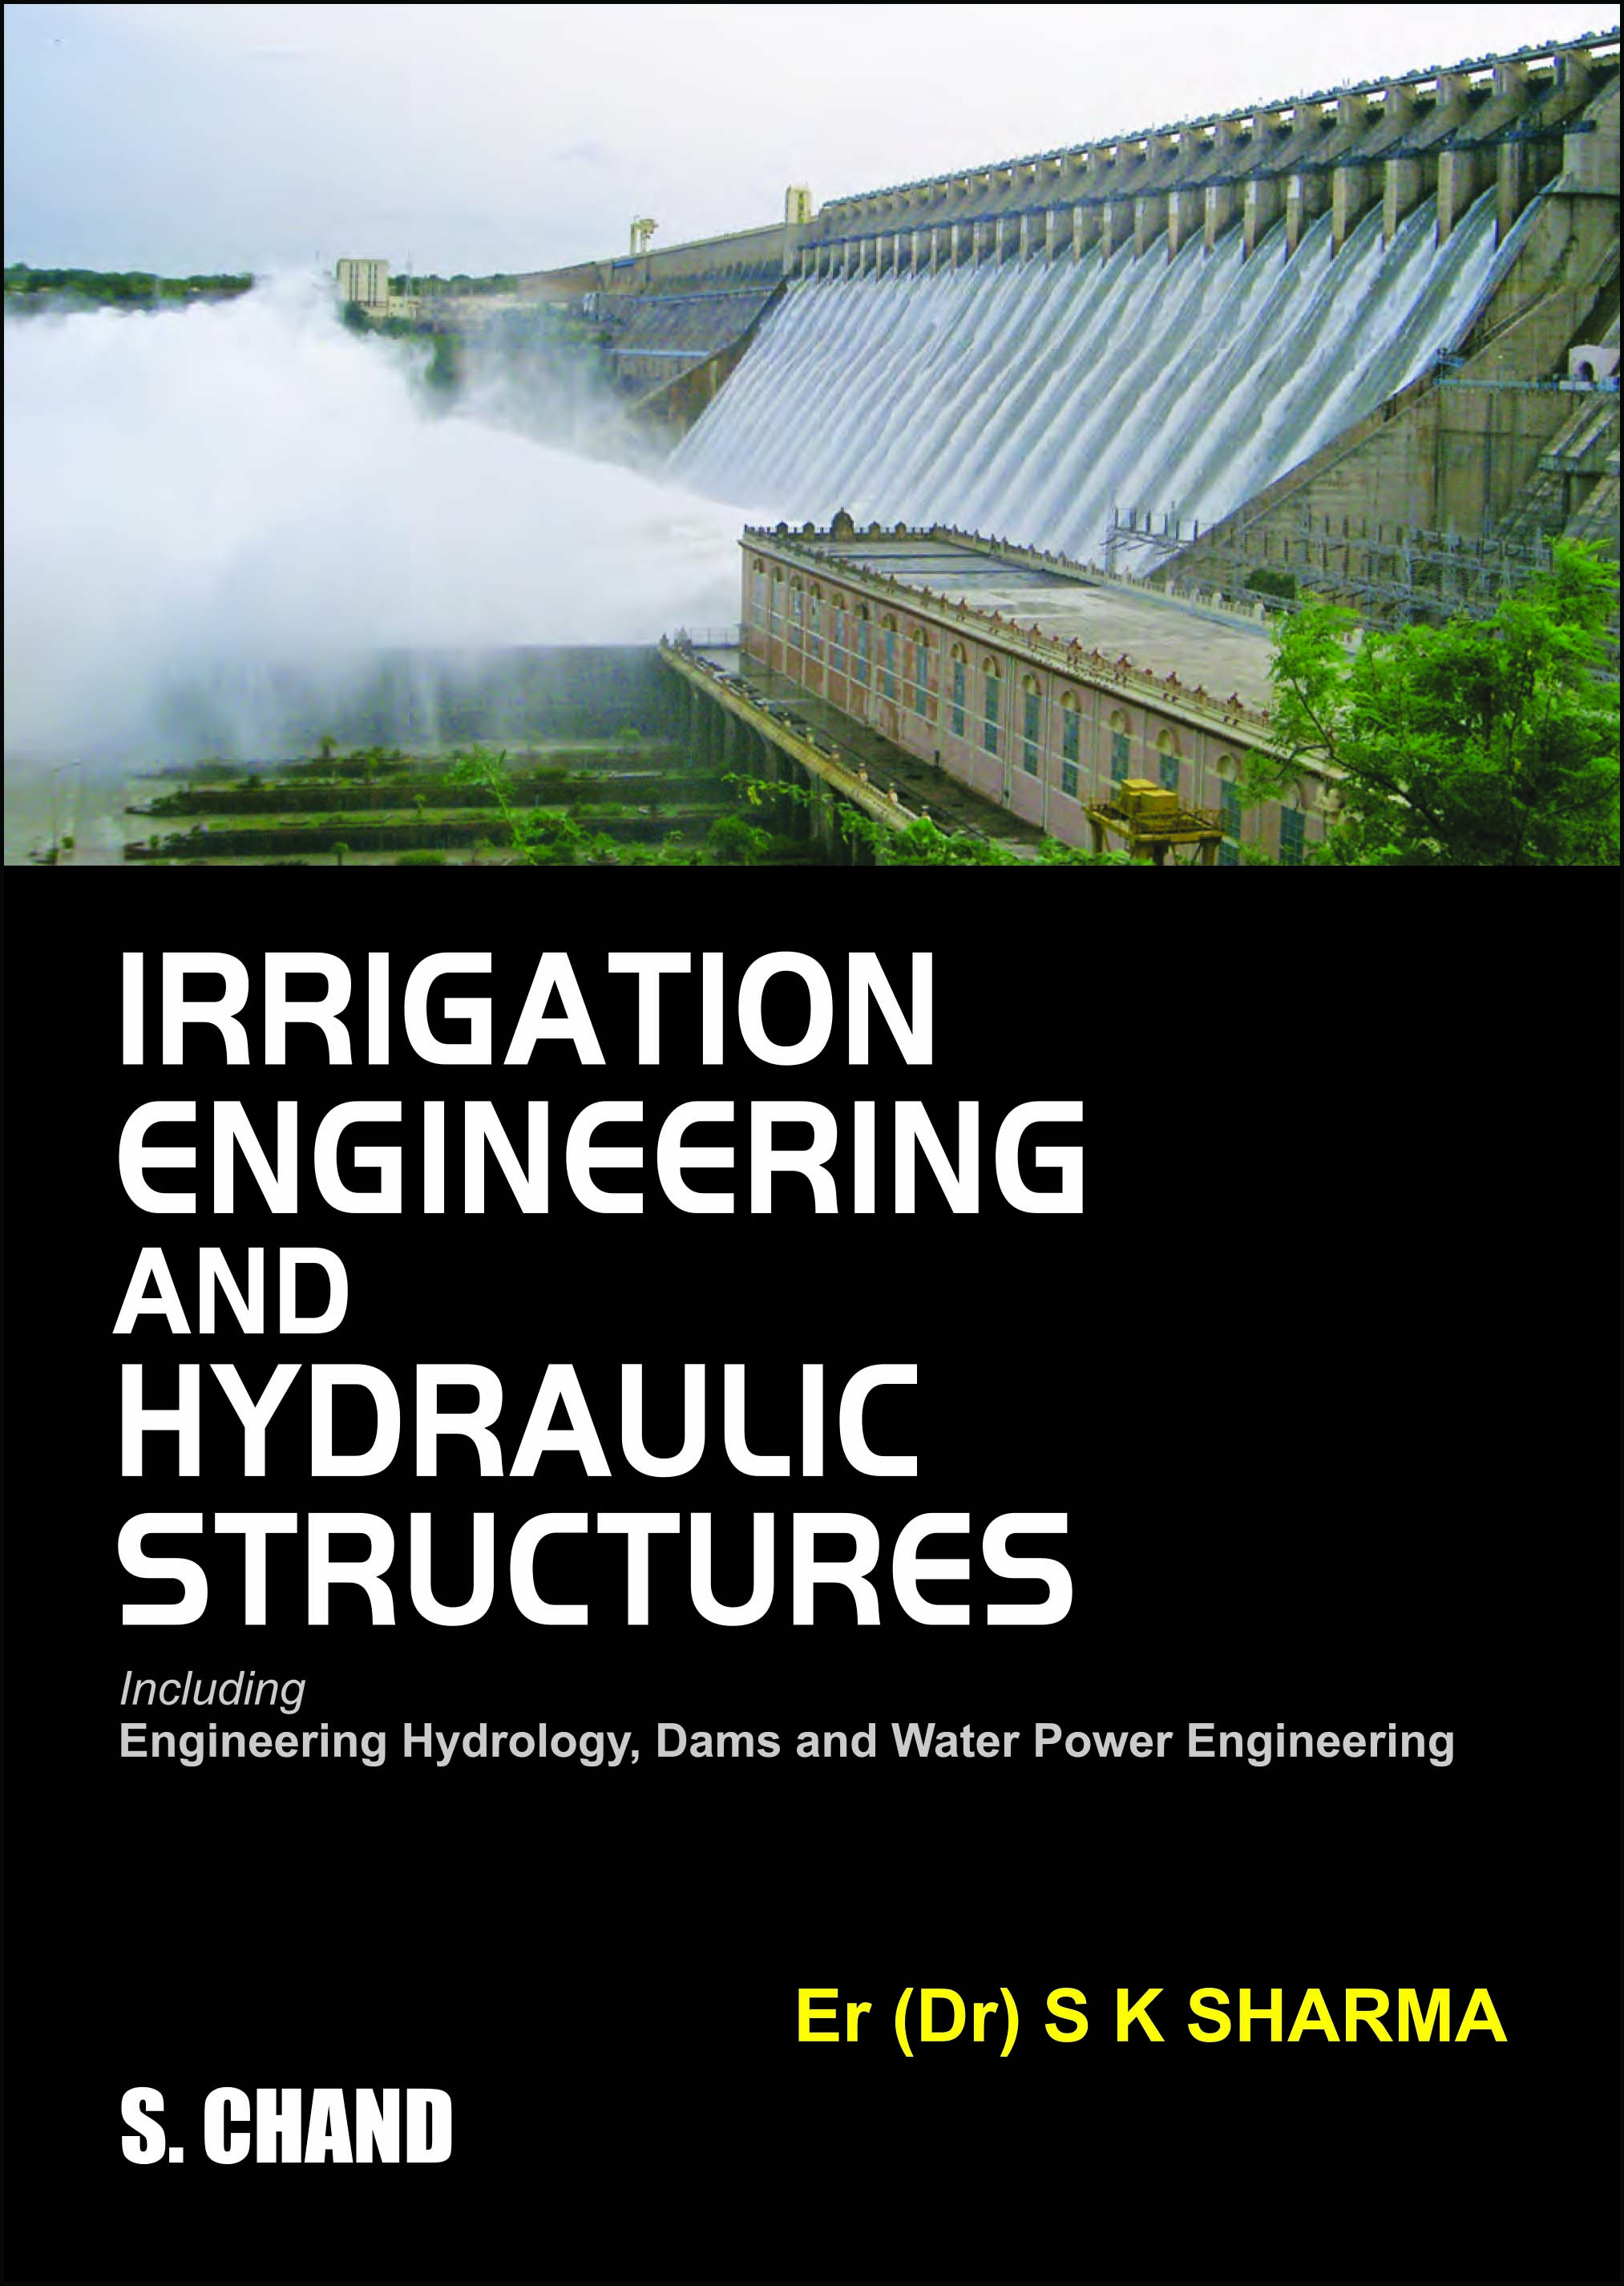 hydraulic structures thesis pdf